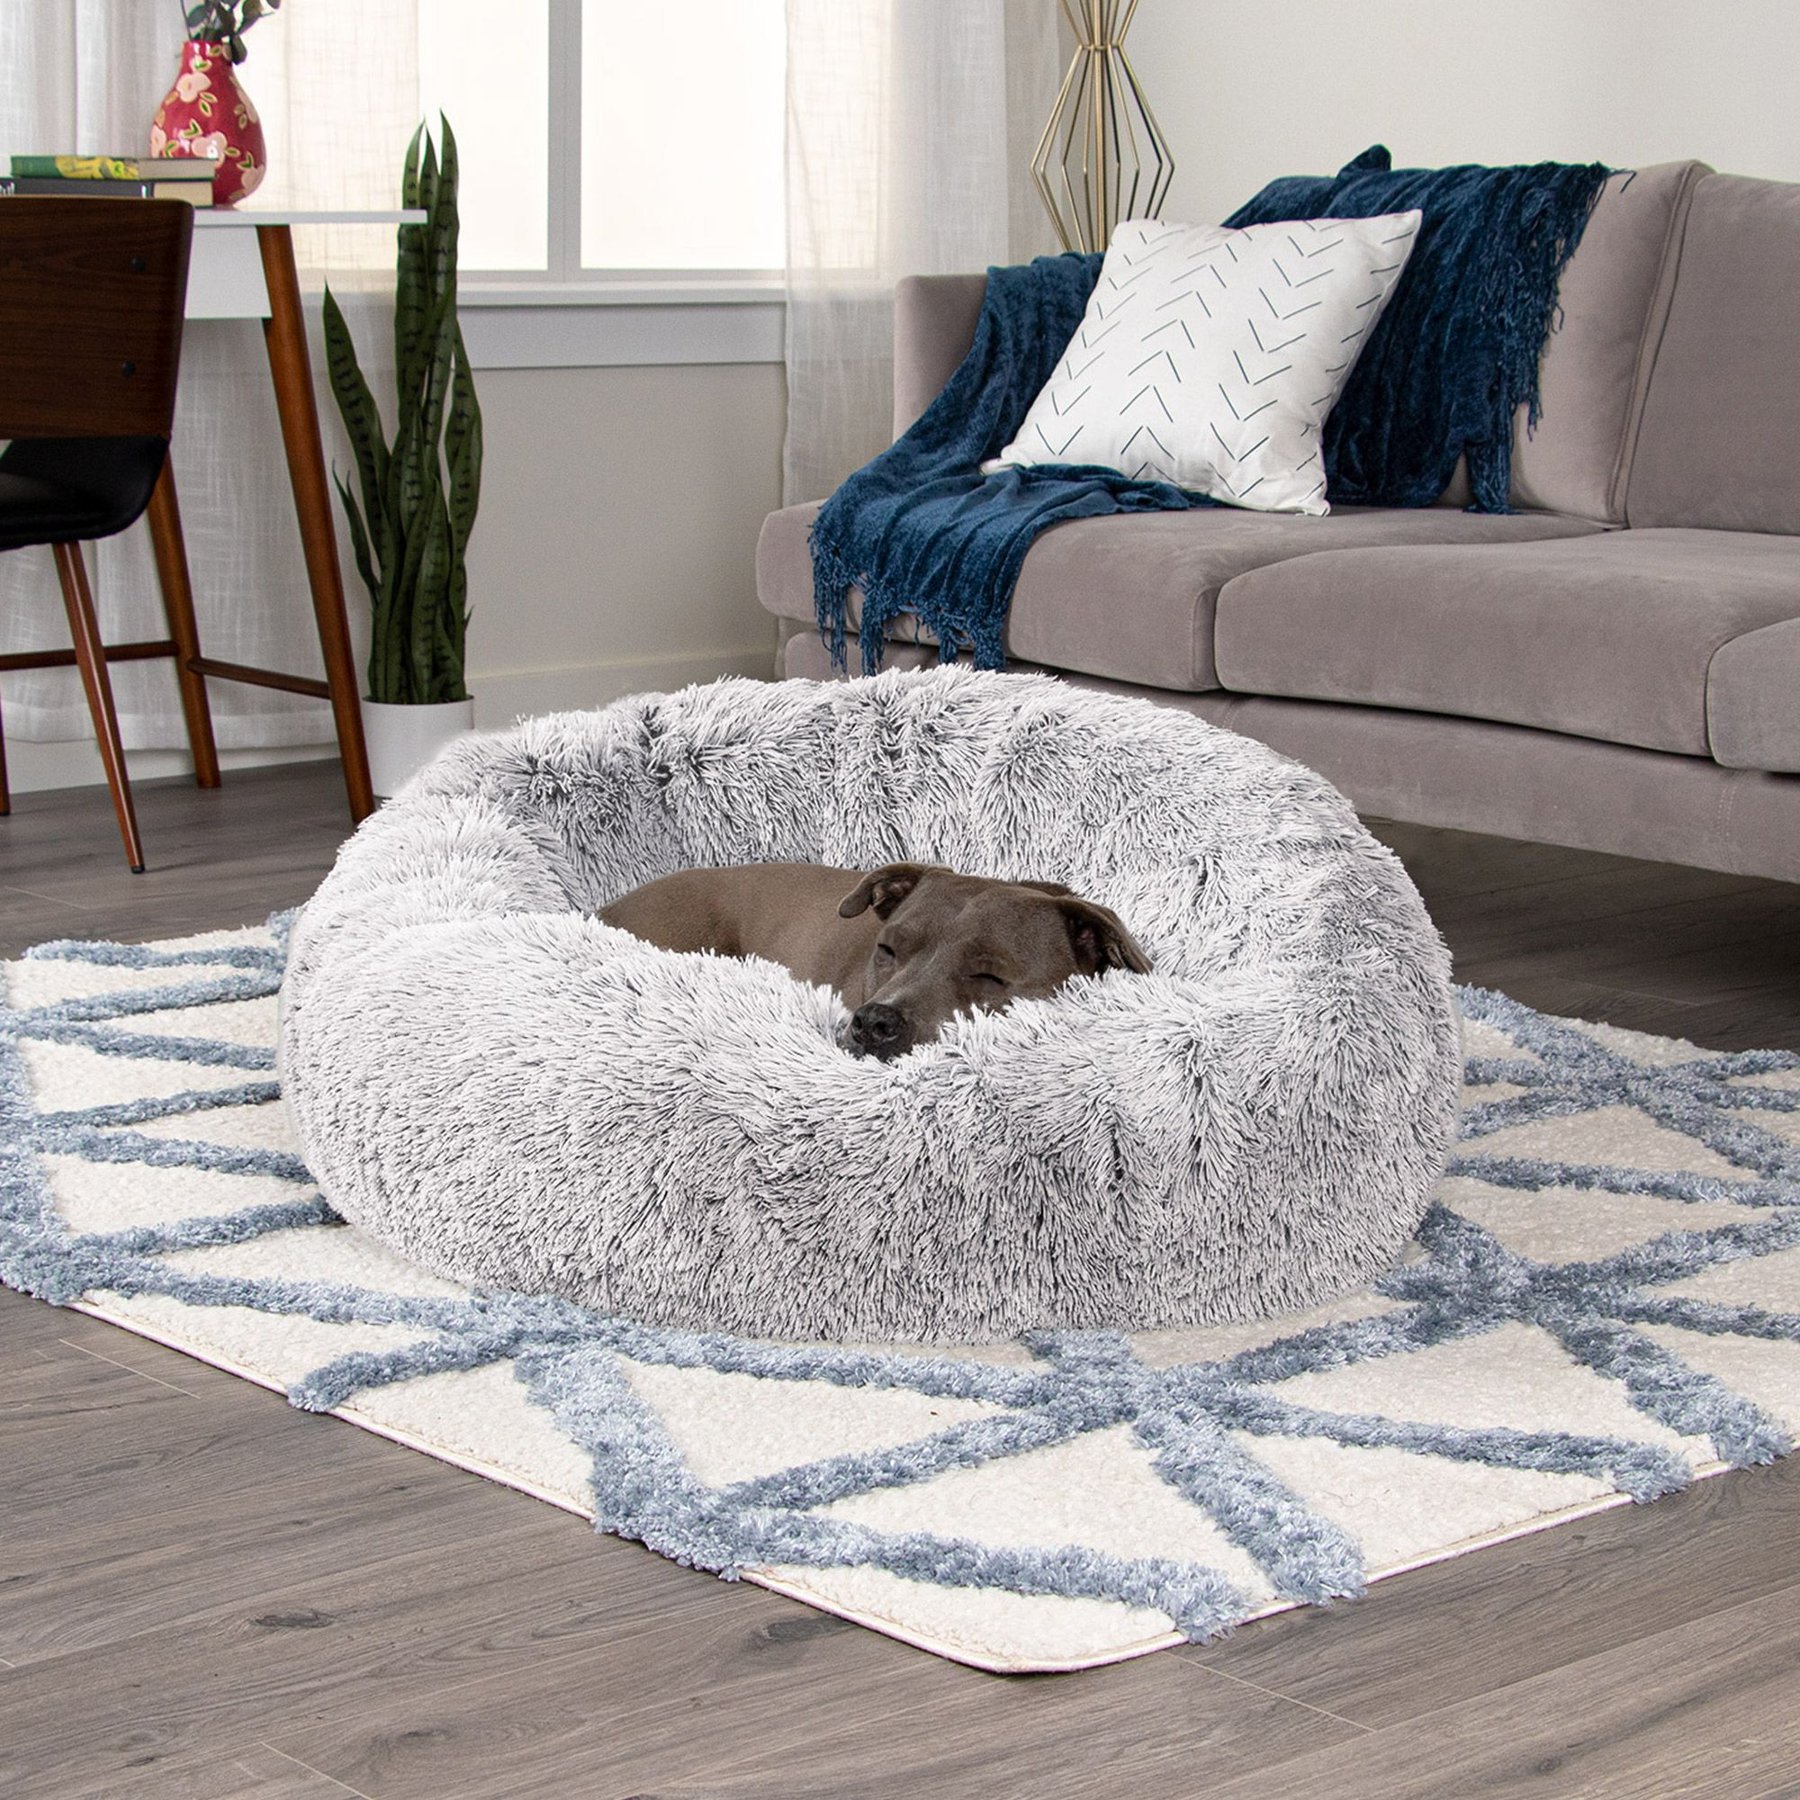 Donut Head Pad, with Center Dish (3 sizes)